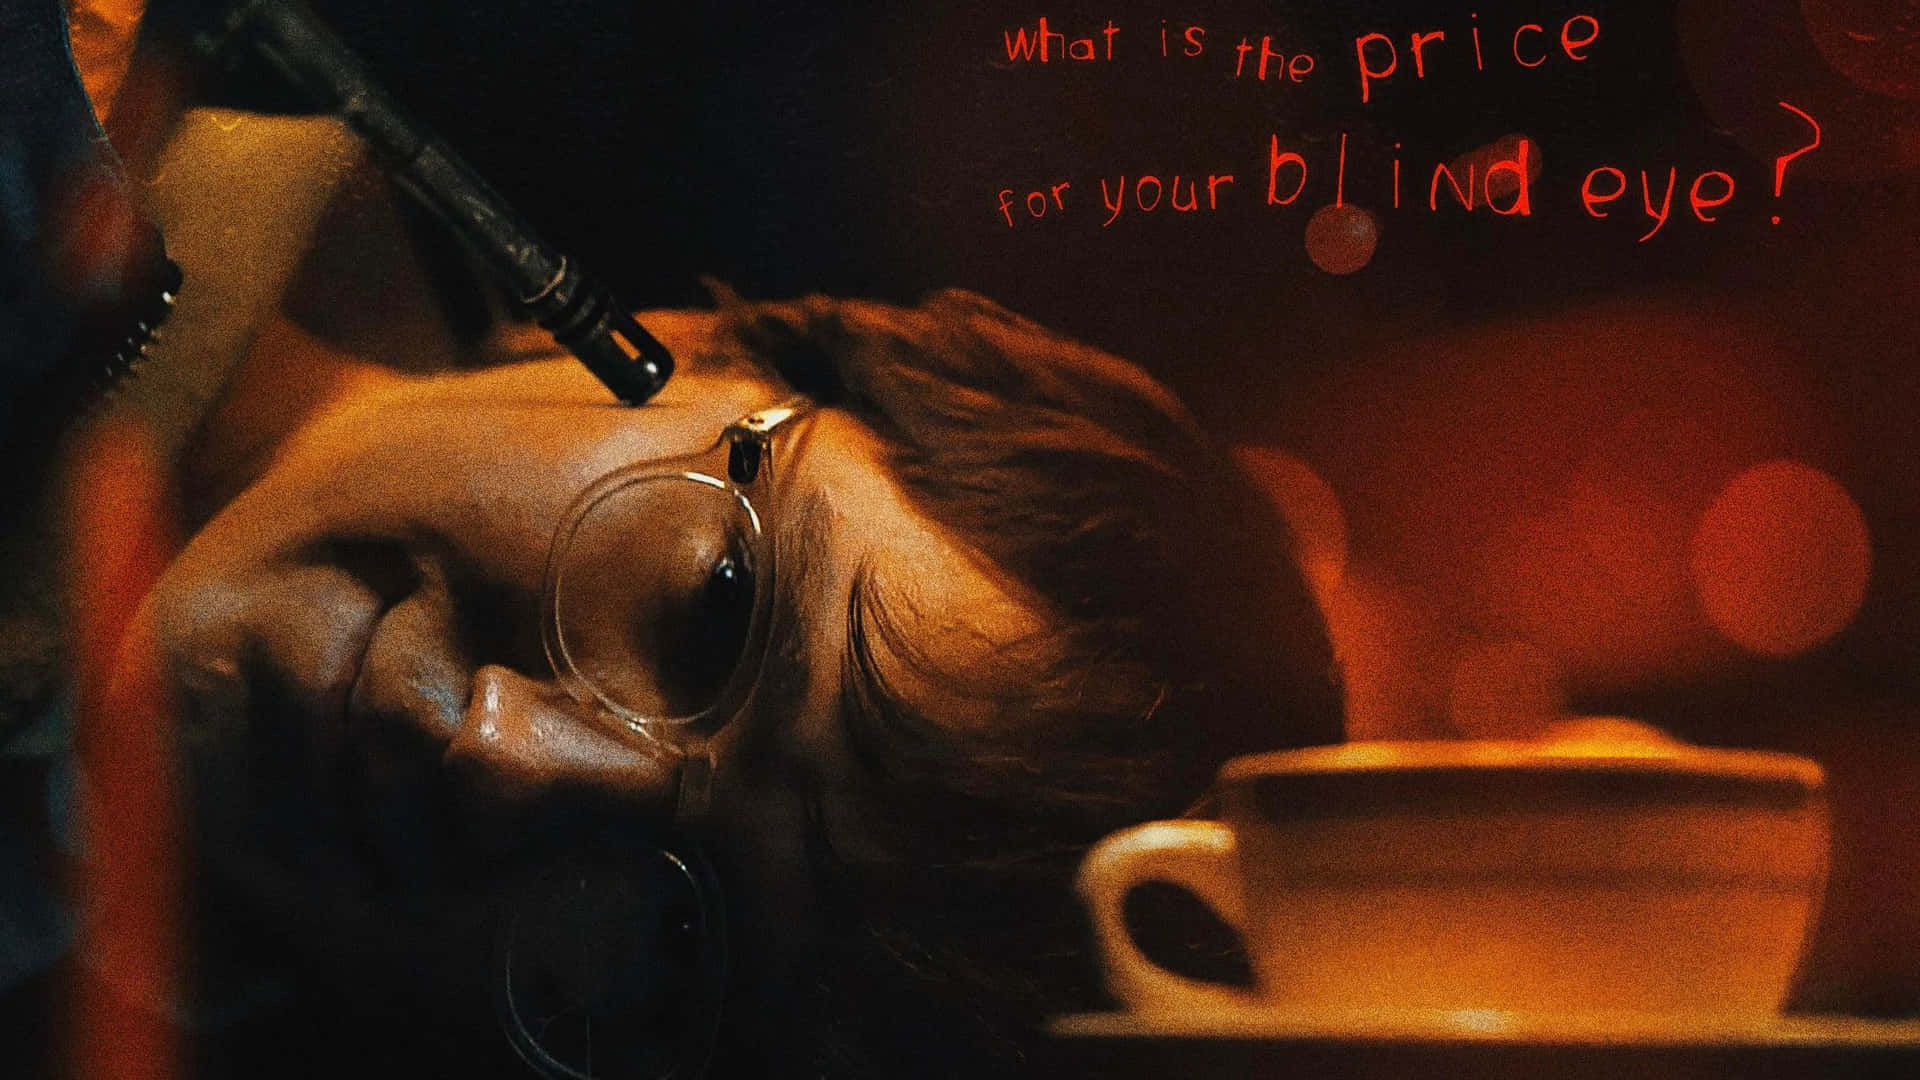 A Man Is Sitting In Front Of A Coffee Cup With The Words What Is The Price Of Your Blind Eye Wallpaper